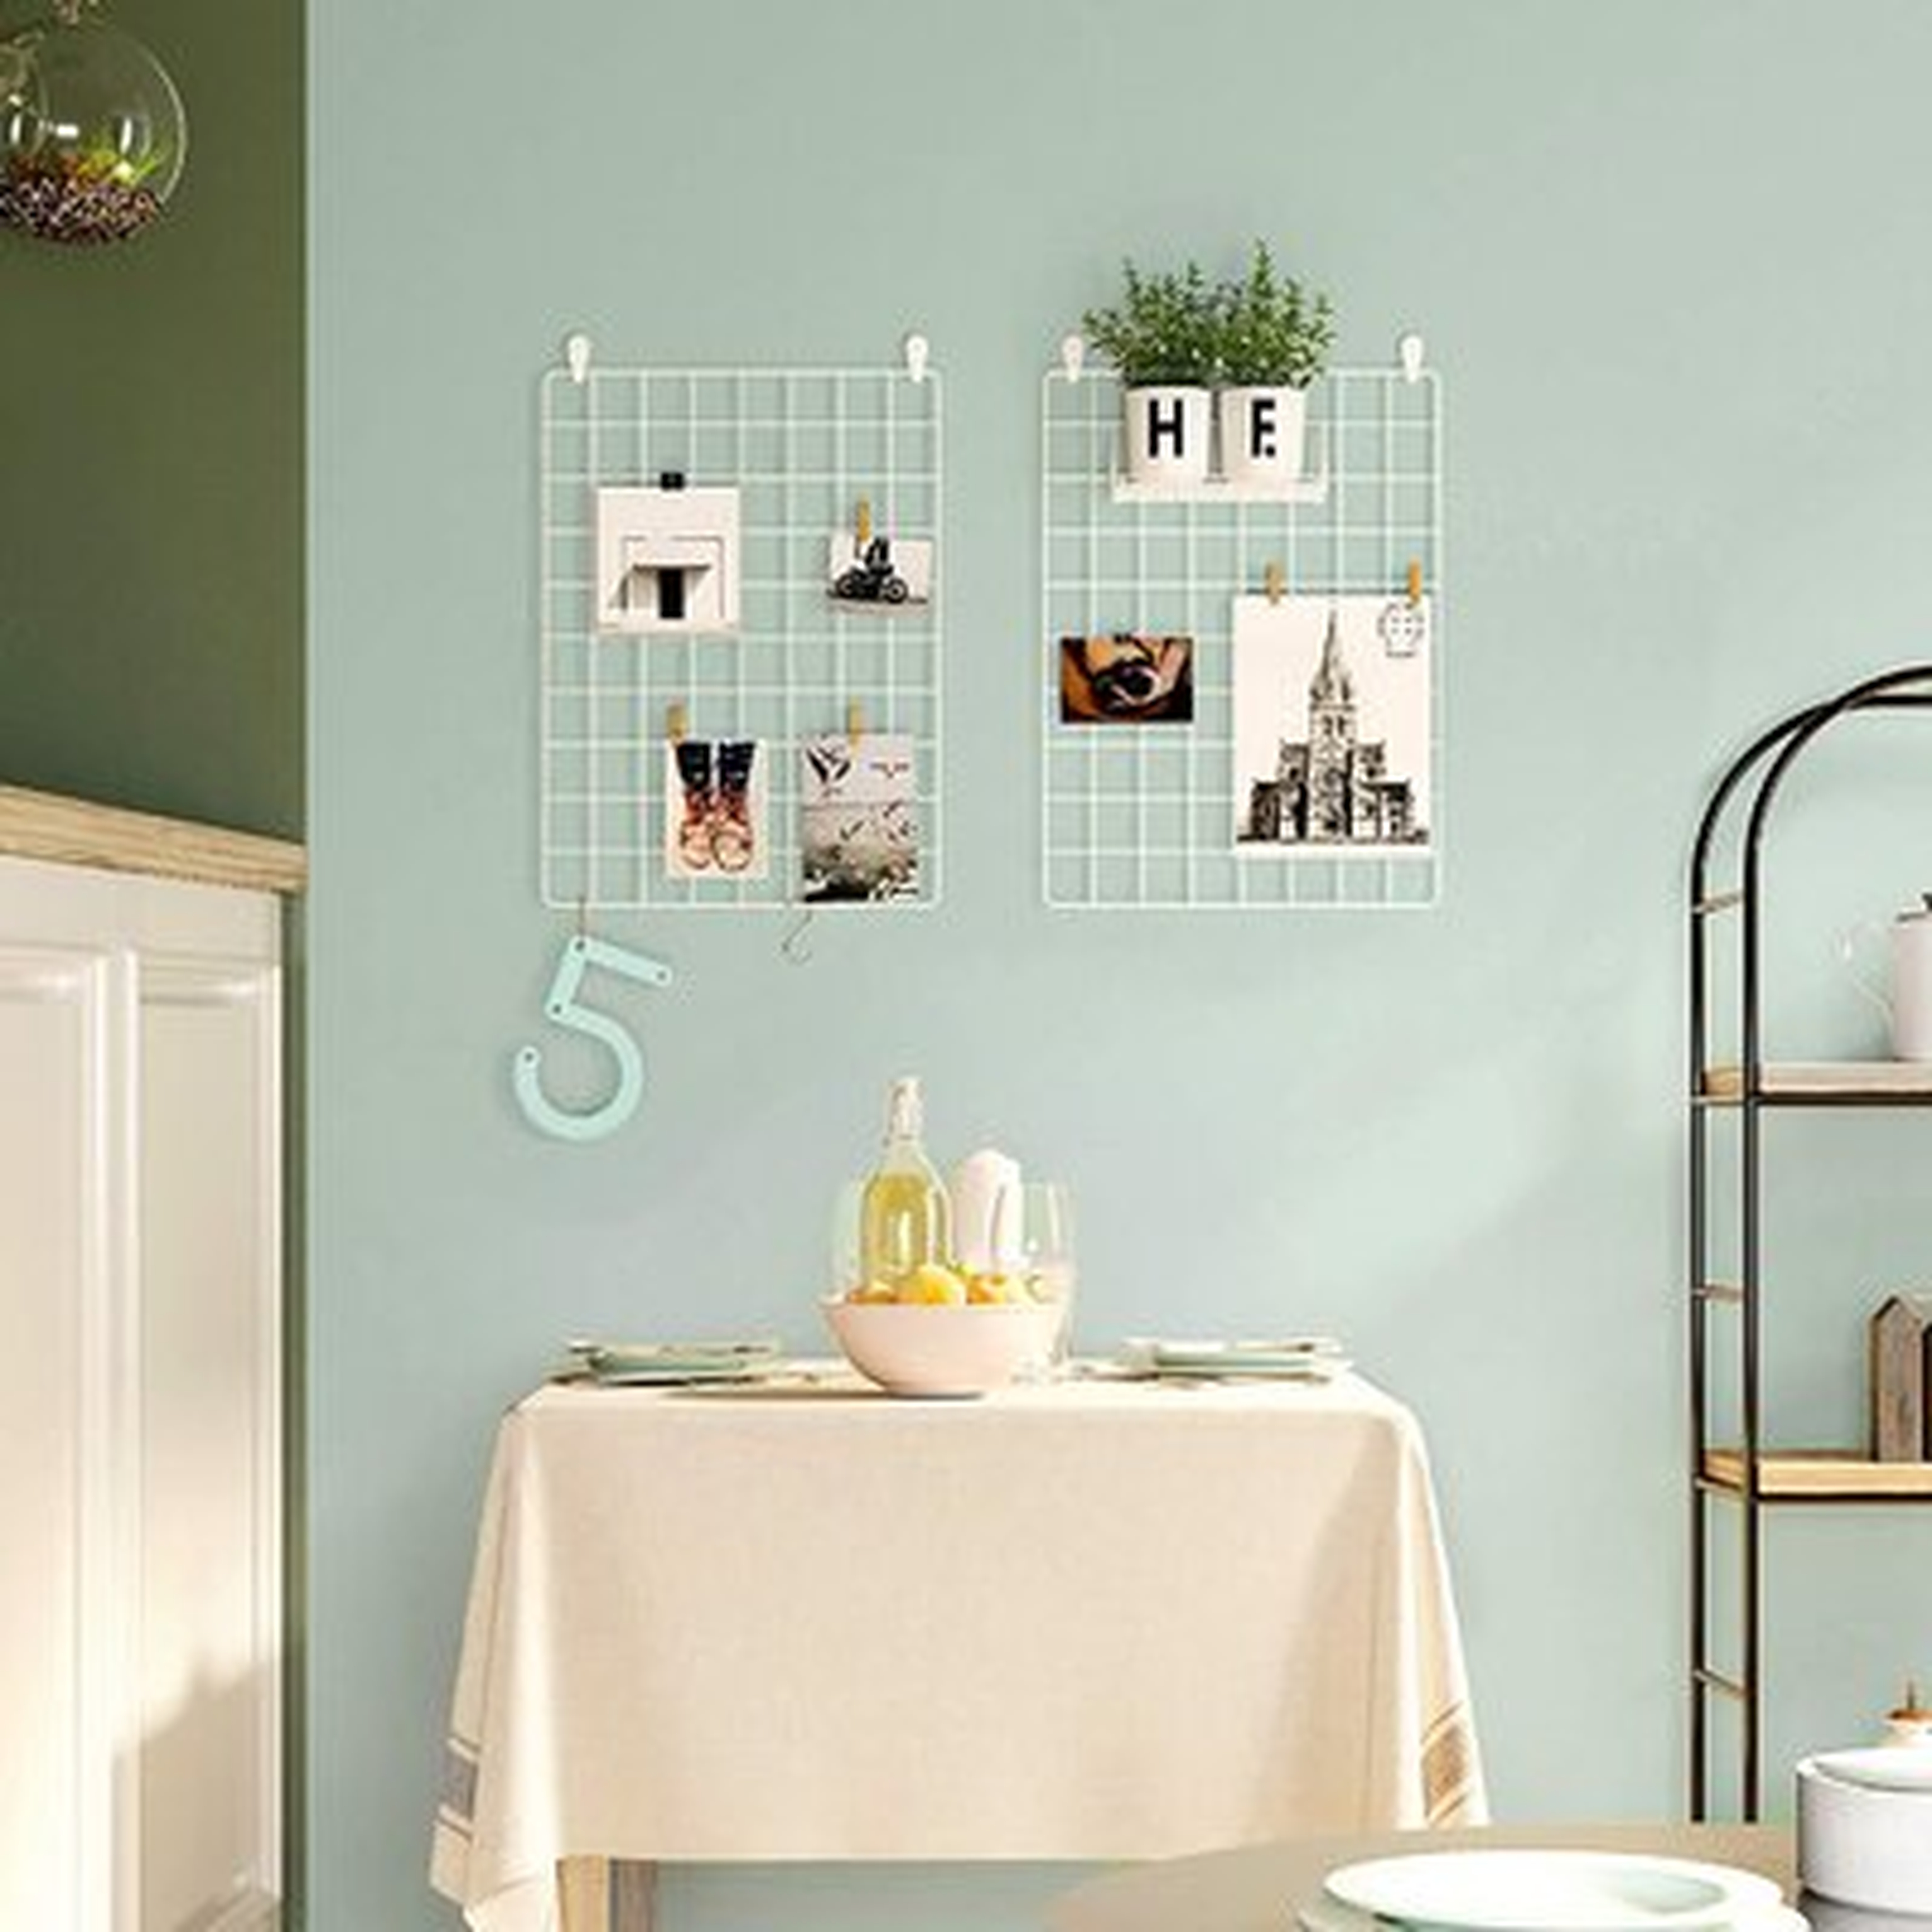 Grid Photo Wall, 16.5 X 12.2 Inches, Set Of 2, Wire Wall Grid Panel, Photo Wall Display, DIY, Hanging Picture Wall With S Hook, Clip, Hemp Cord, White - Wayfair